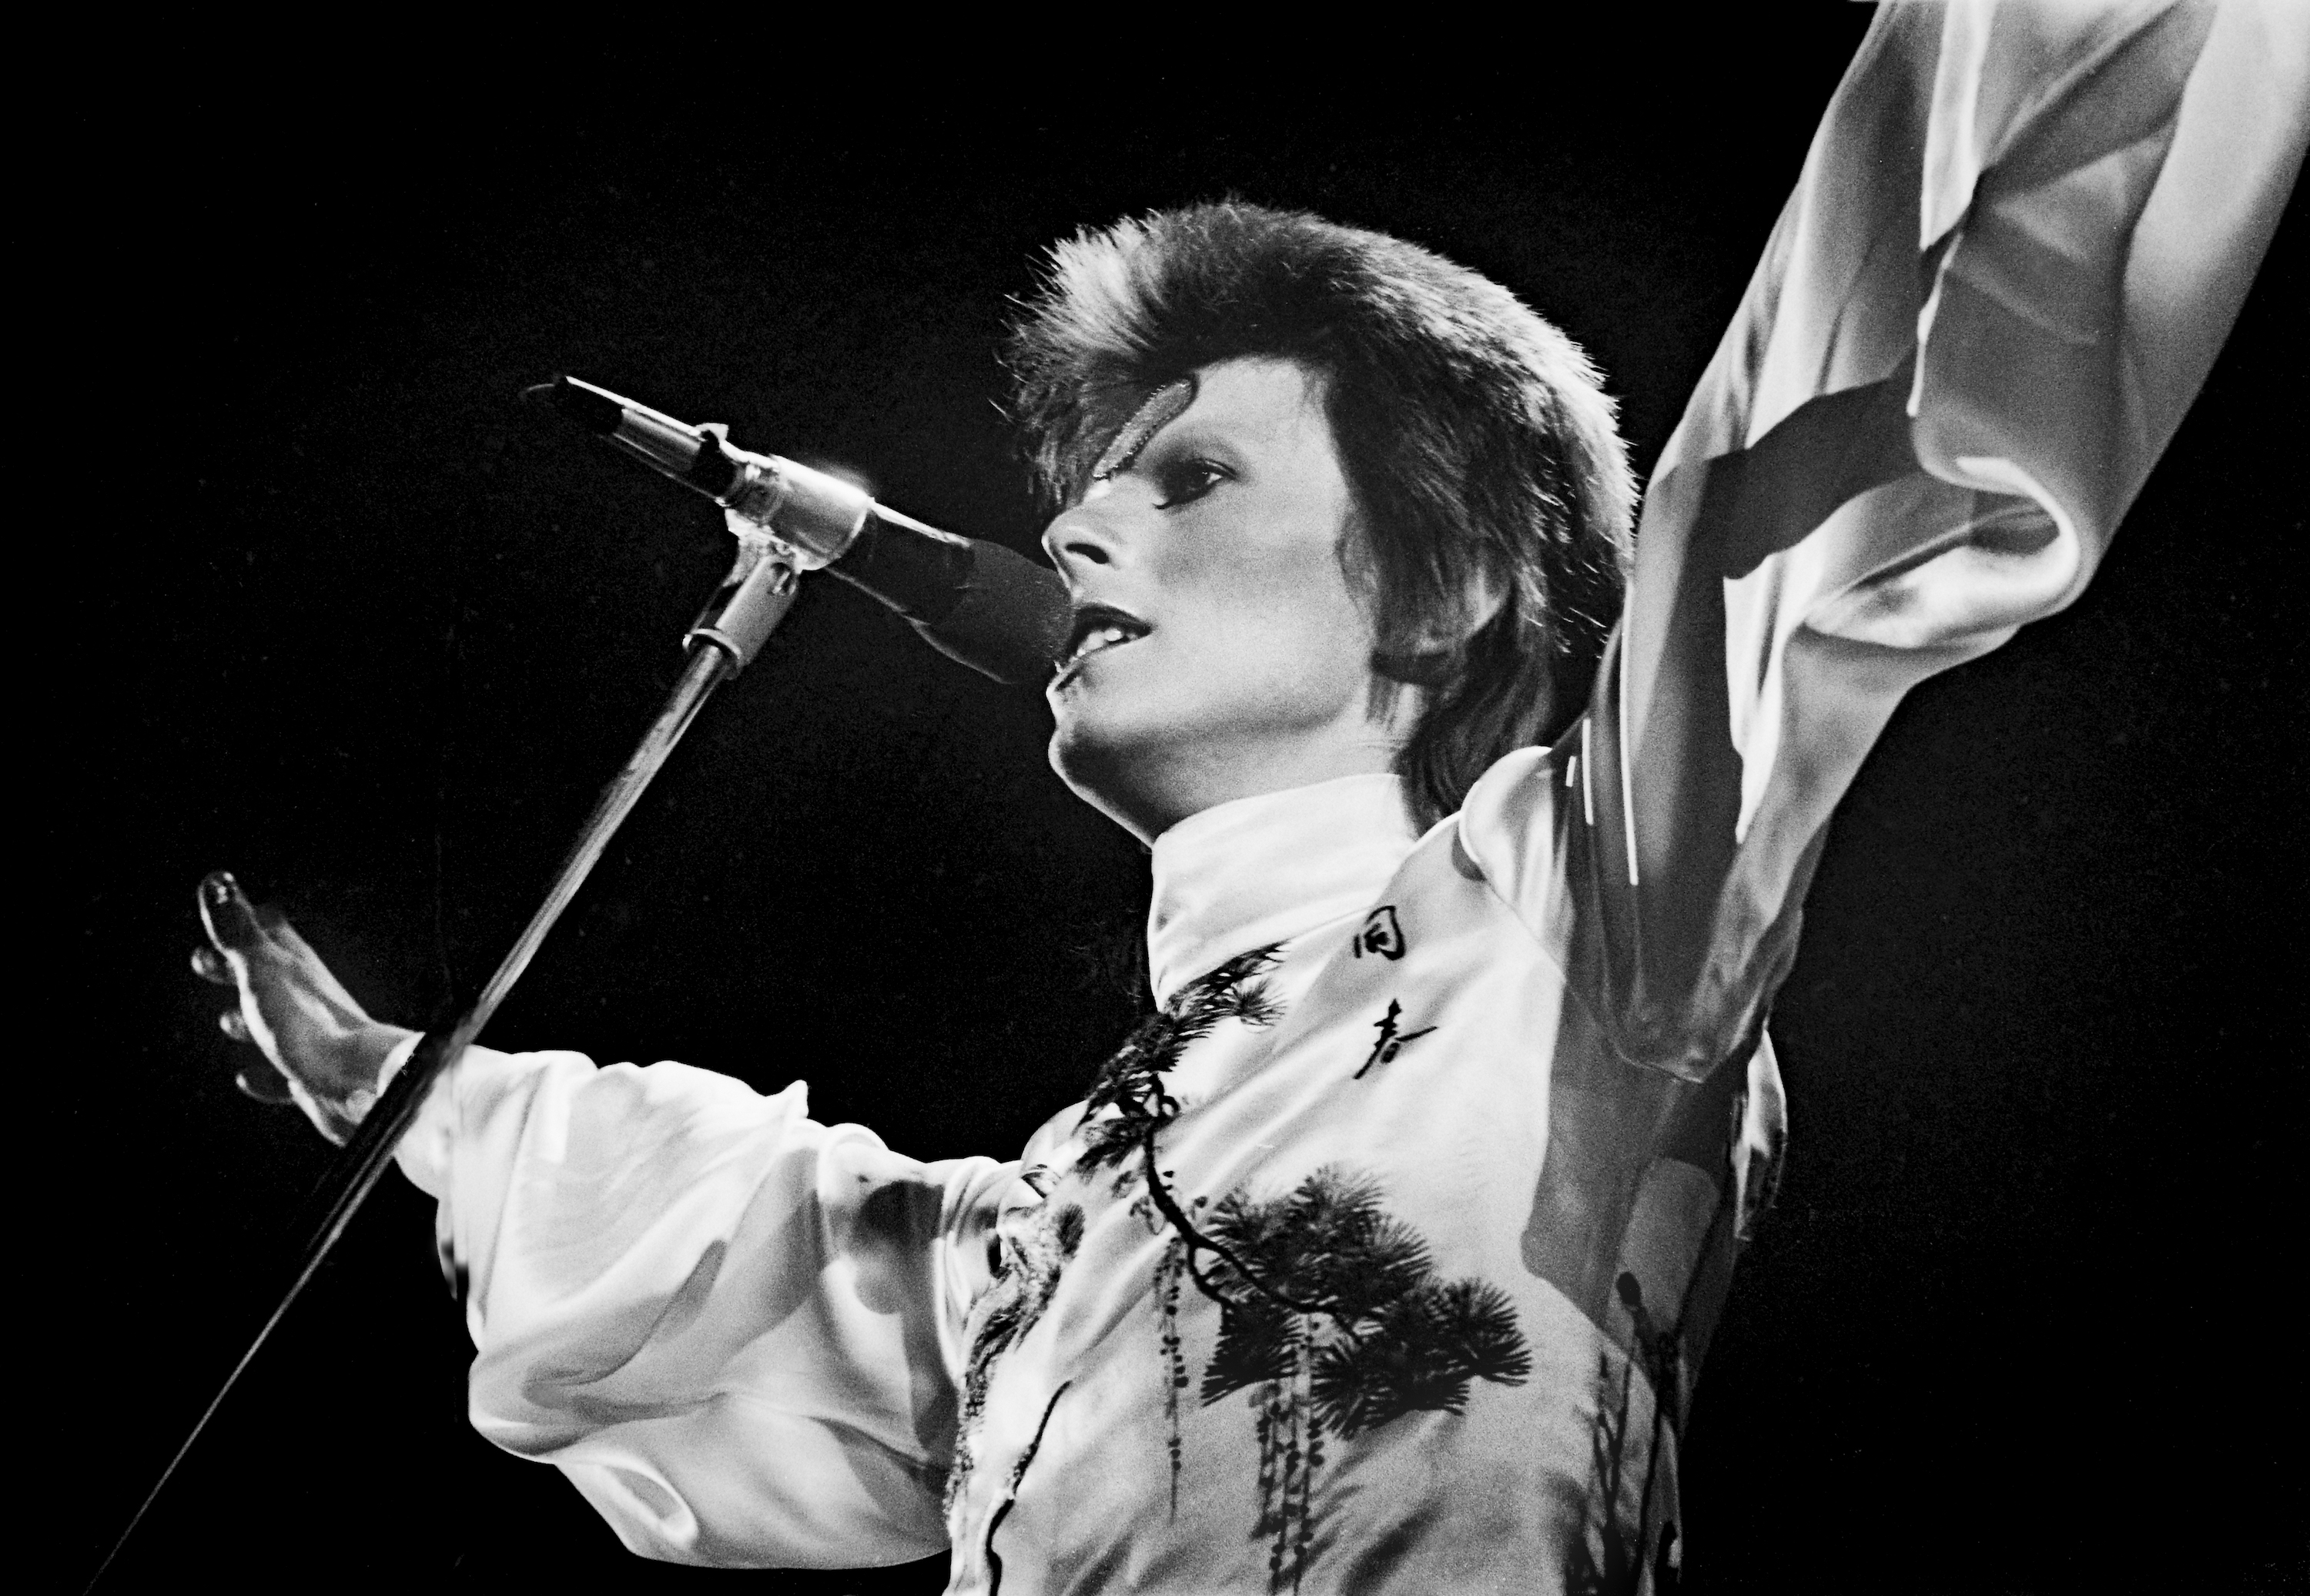 Ziggy Stardust and The Spiders From Mars - Live by David Bowie